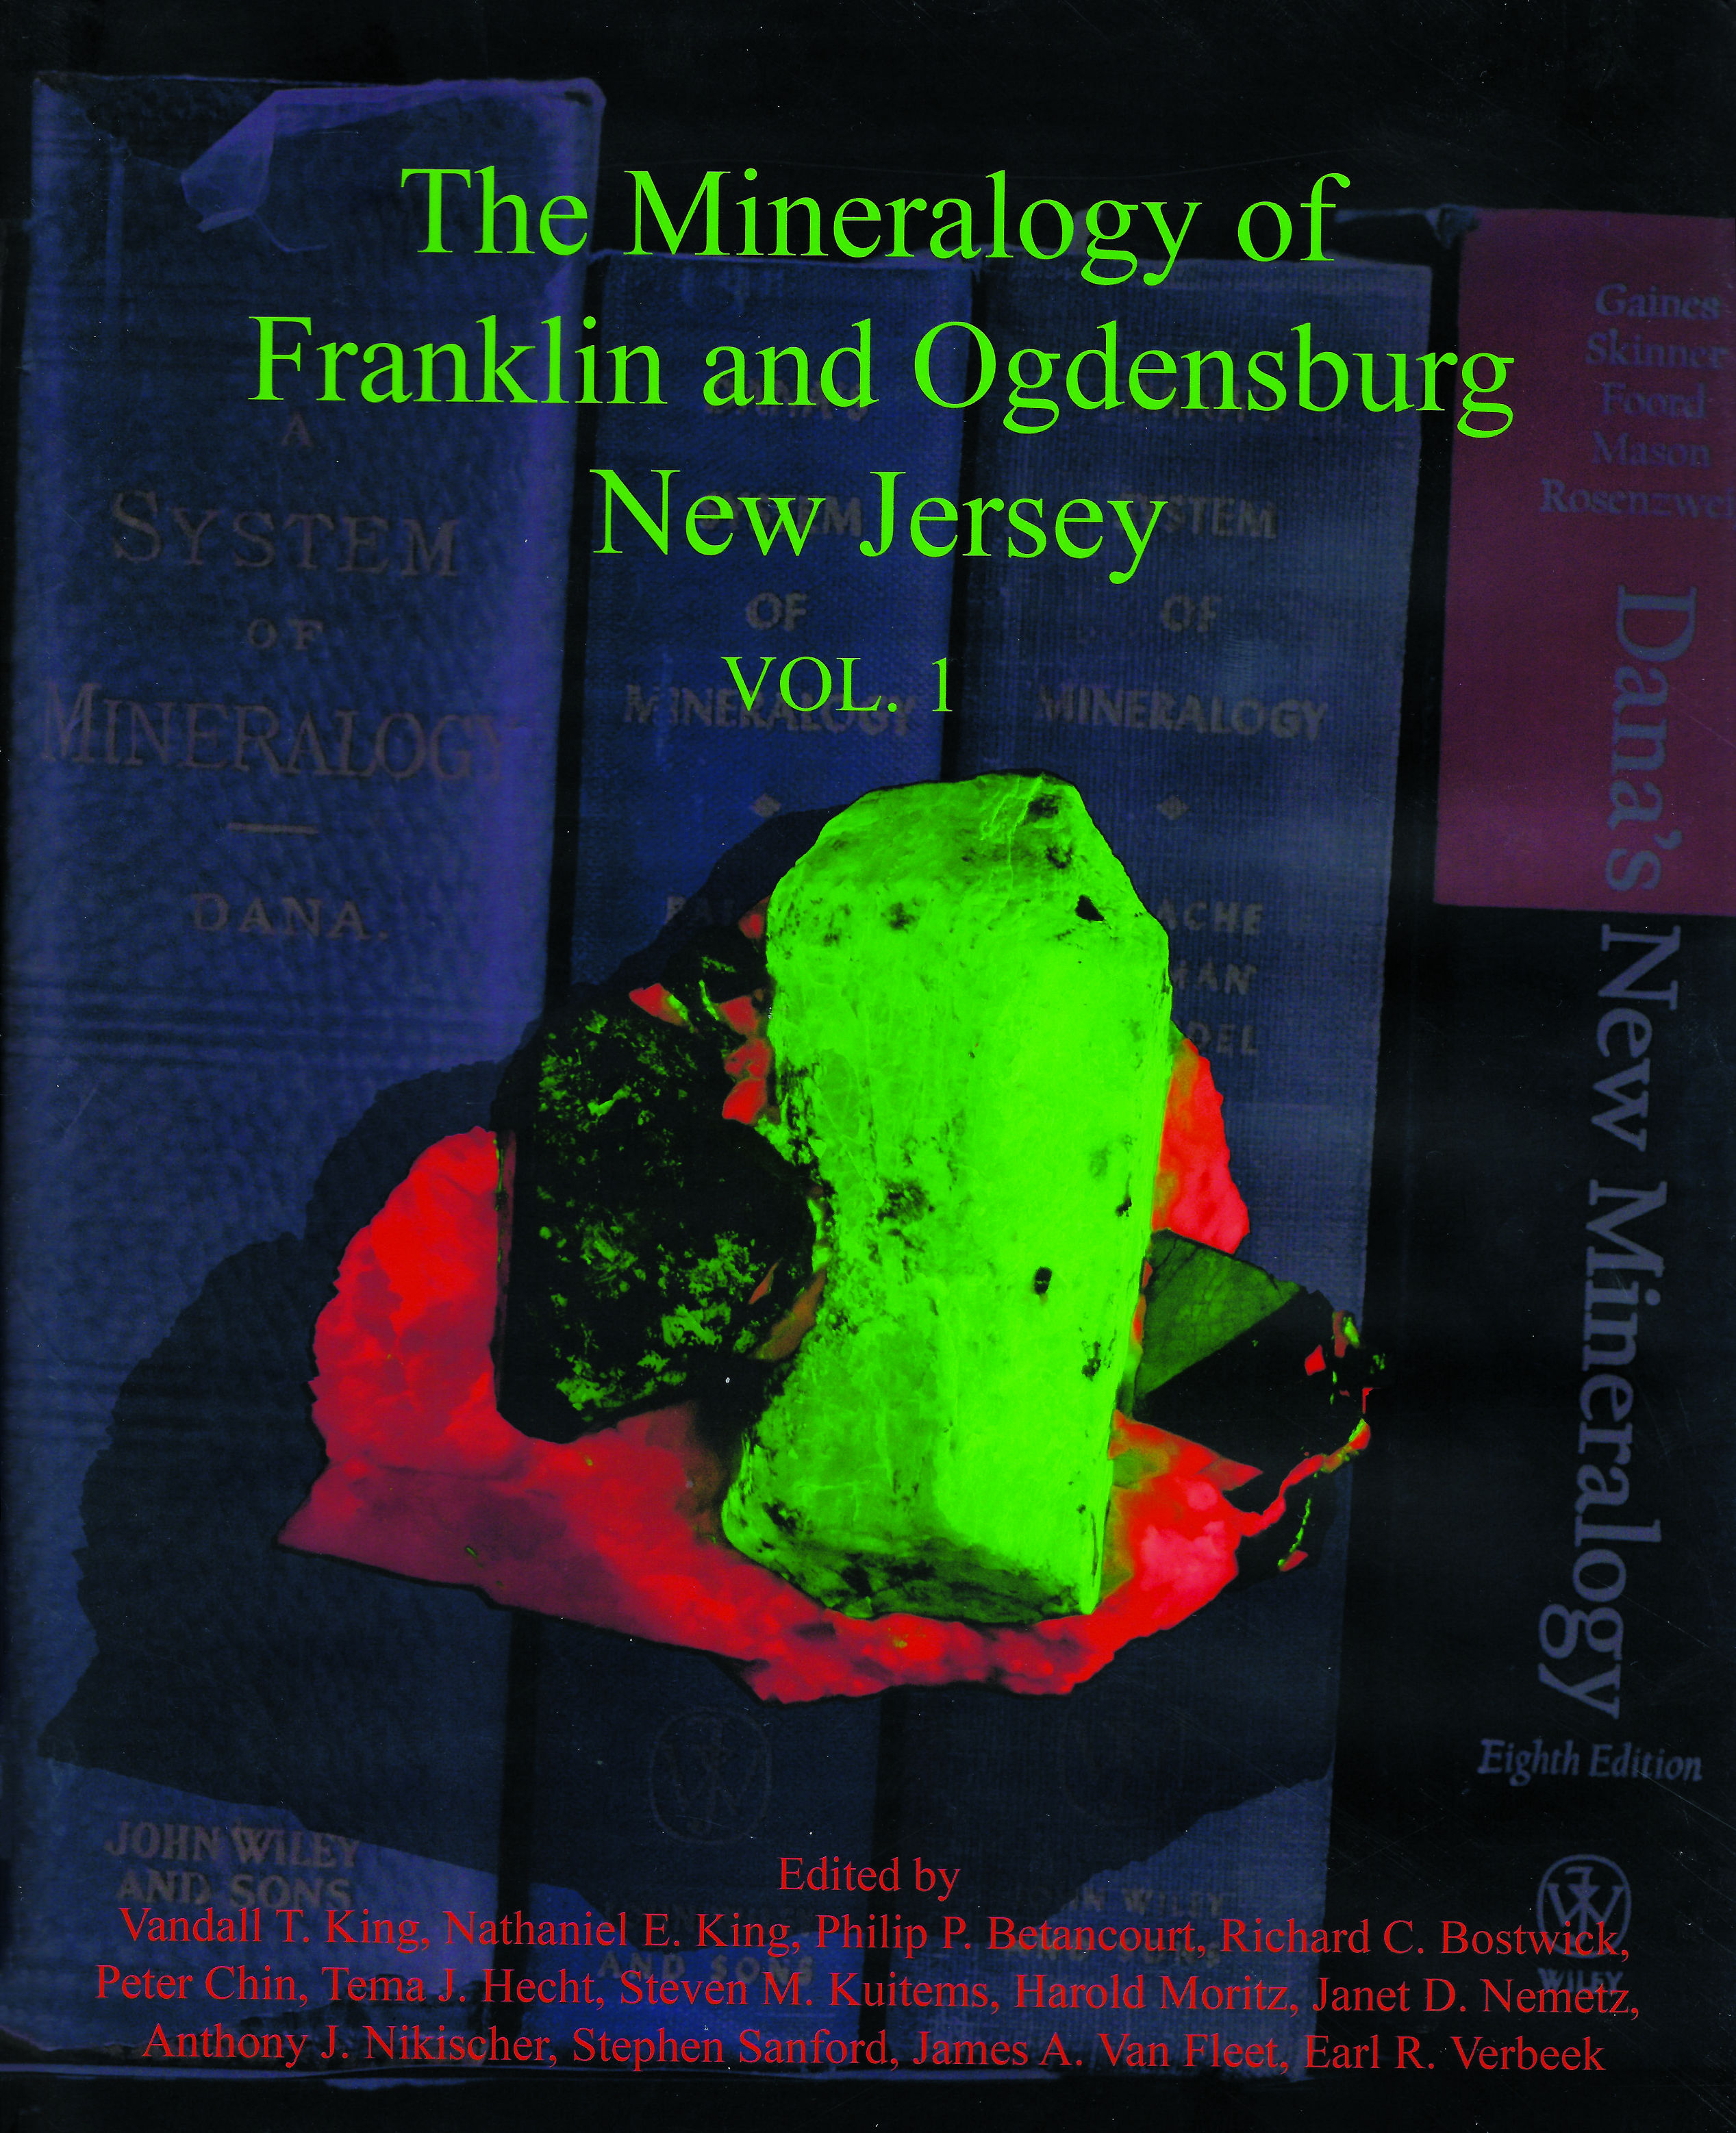 The Mineralogy of Franklin and Ogdensburg, New Jersey: a Photographic Celebration